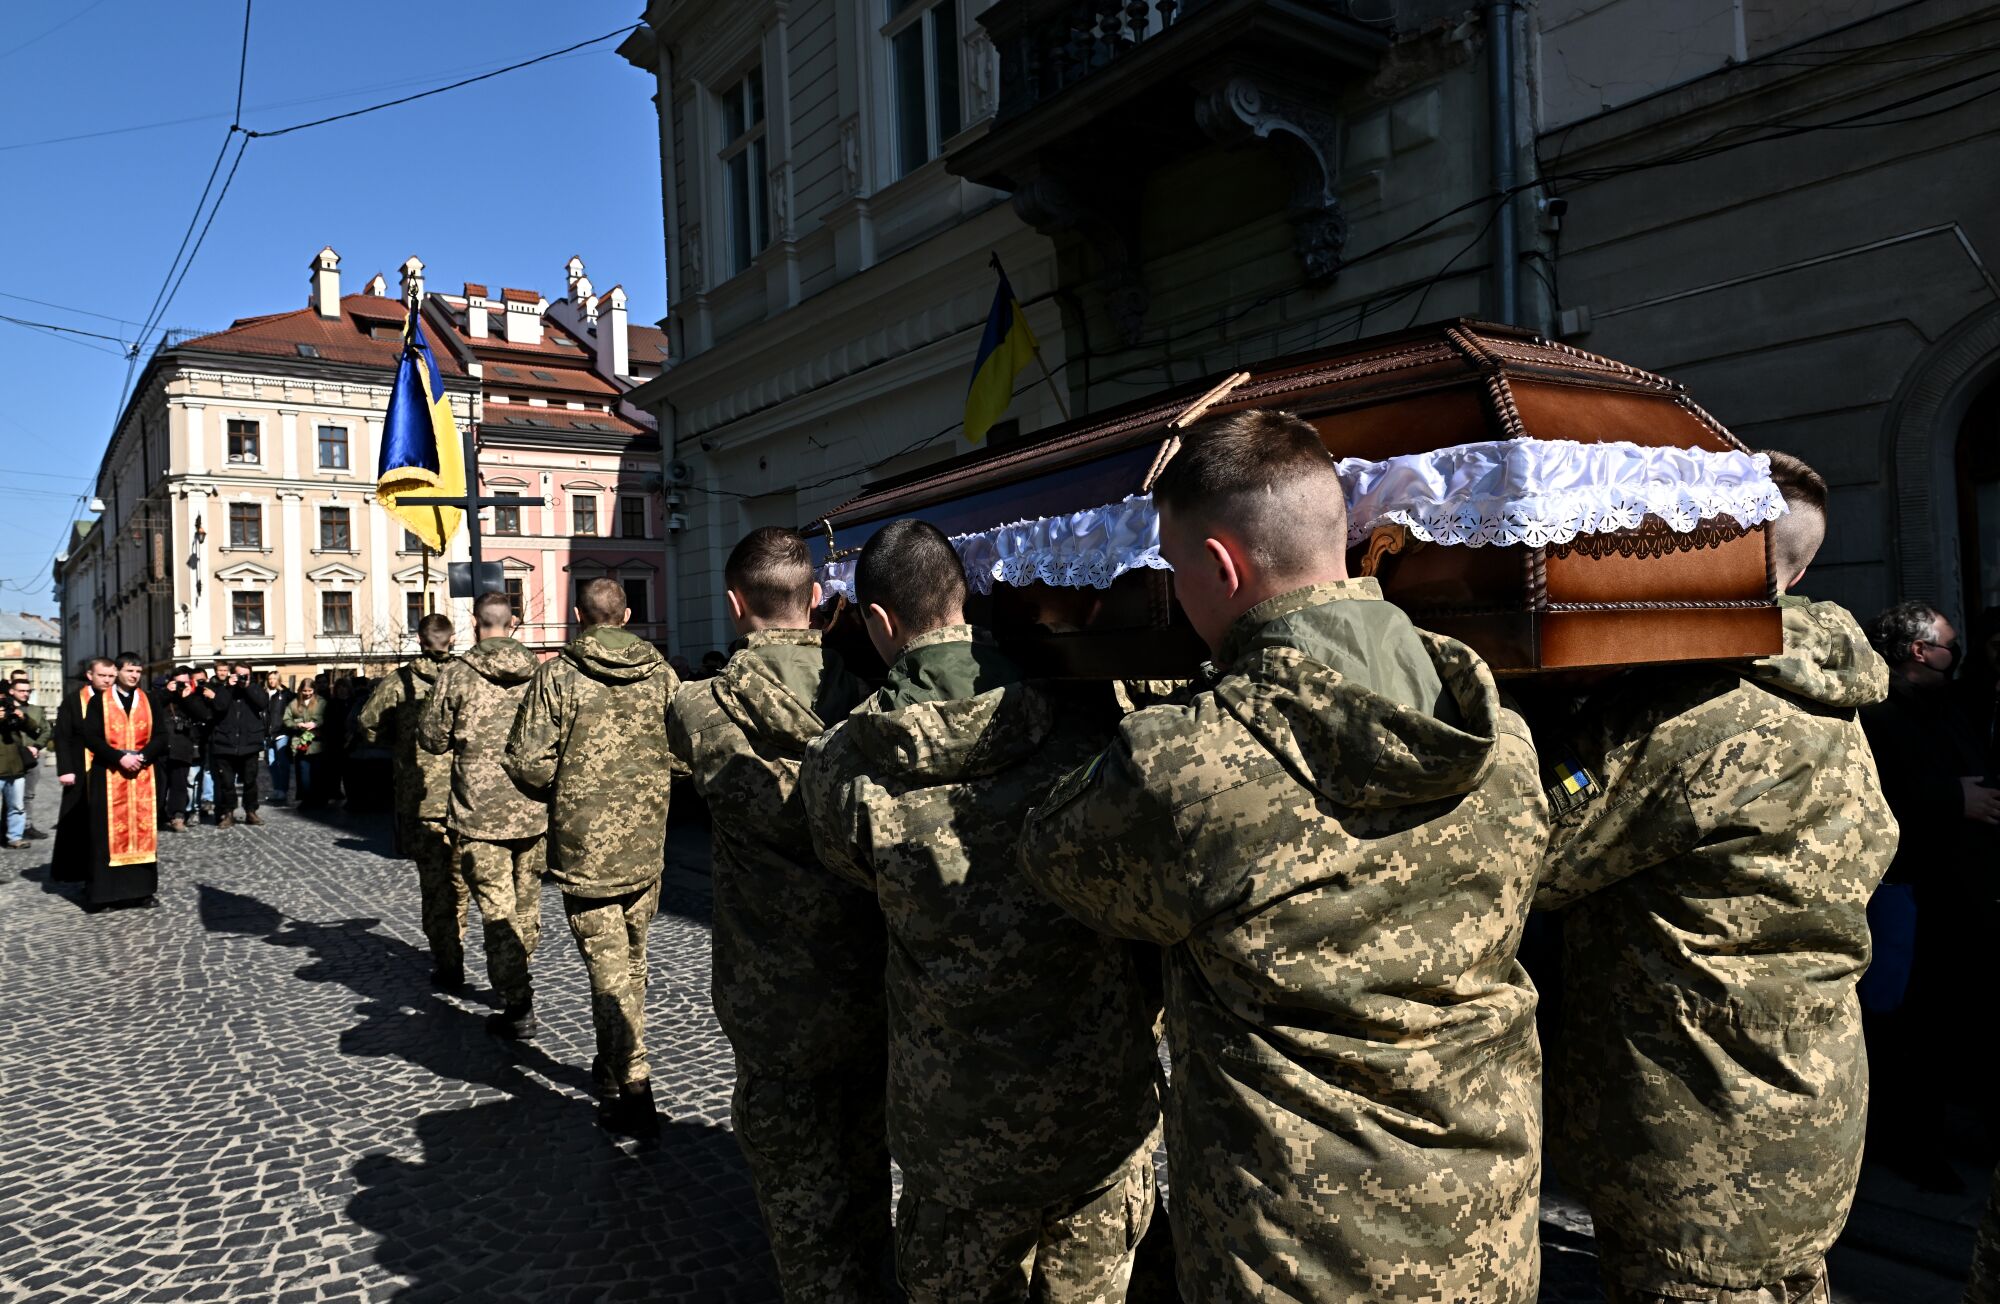 Soldiers carry a casket 